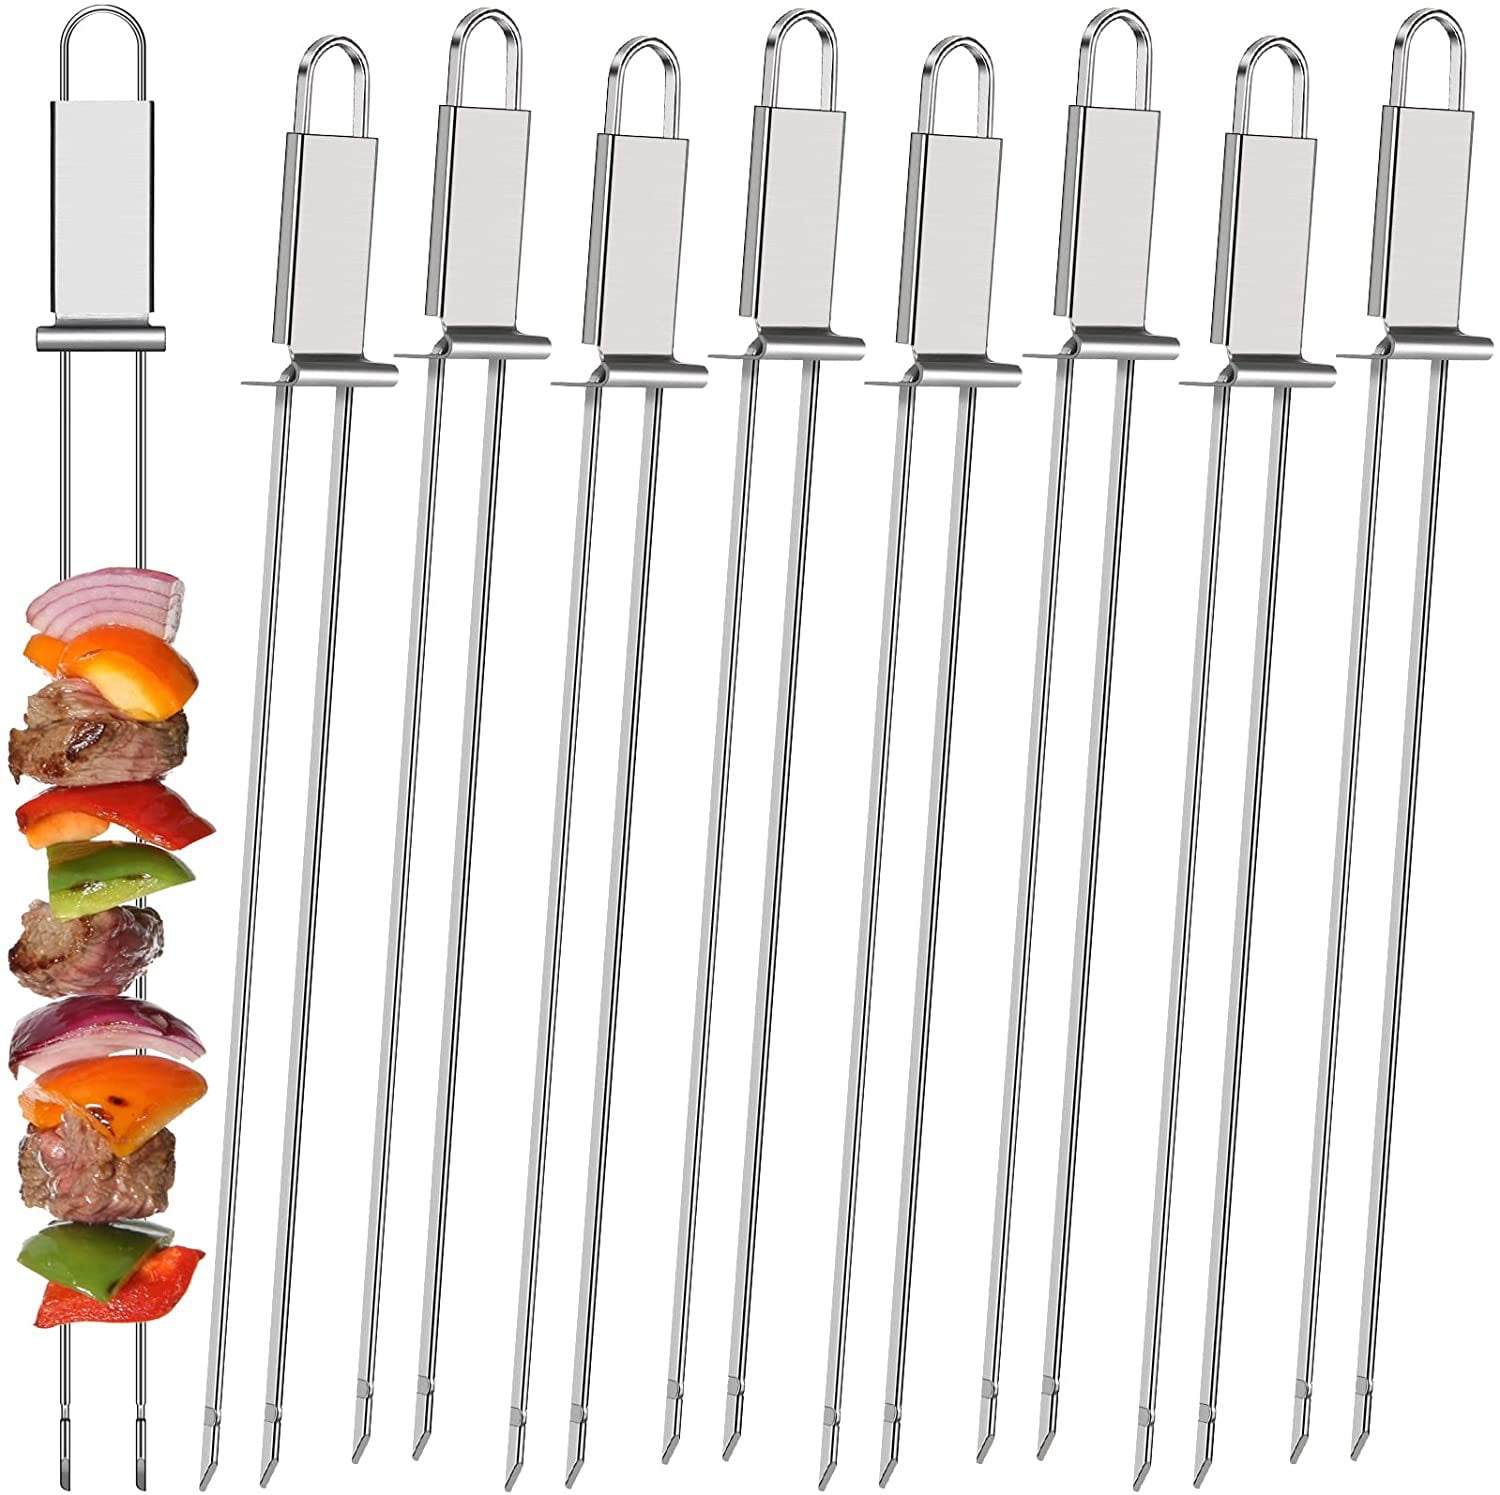 Digital BBQ Fork @ Sharper Image  Bbq, Outdoor cooking, Types of meat